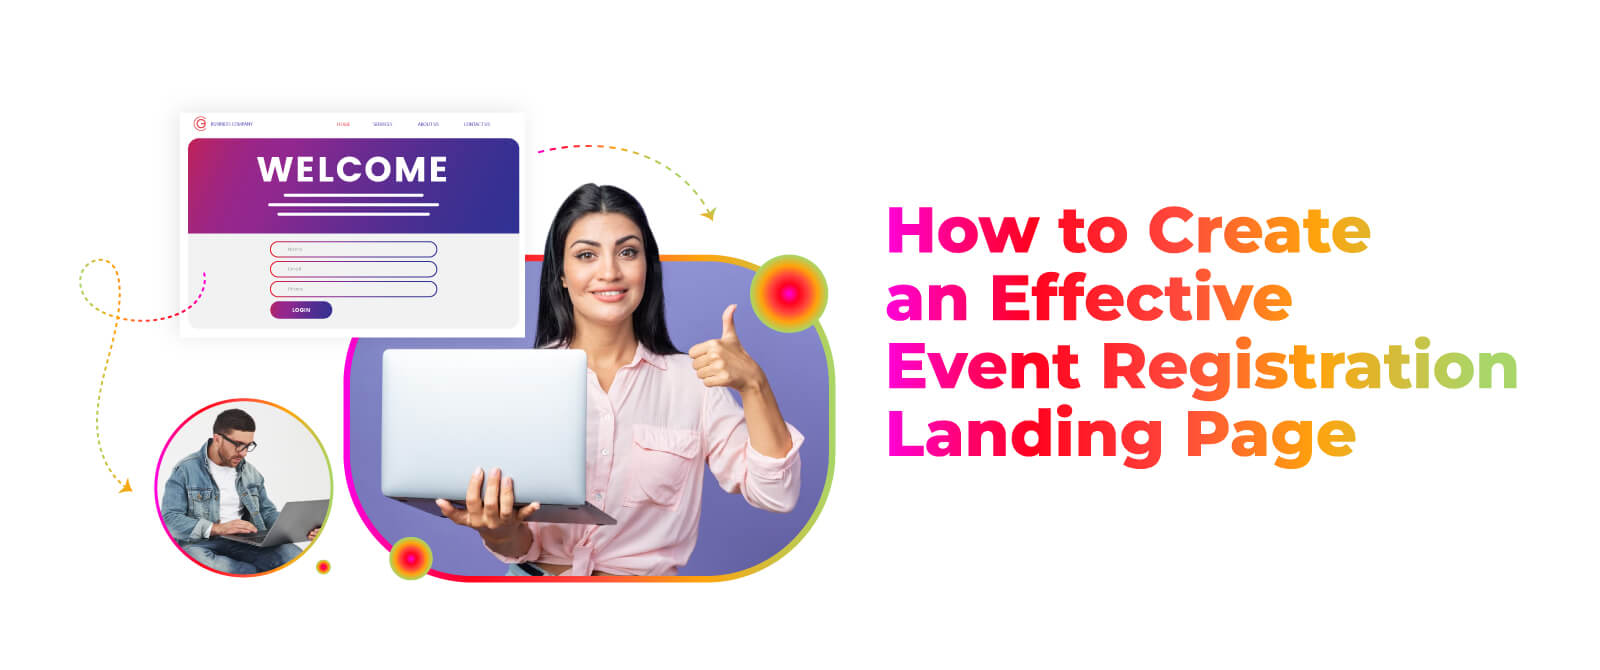 How to Create an Effective Event Registration Landing Page